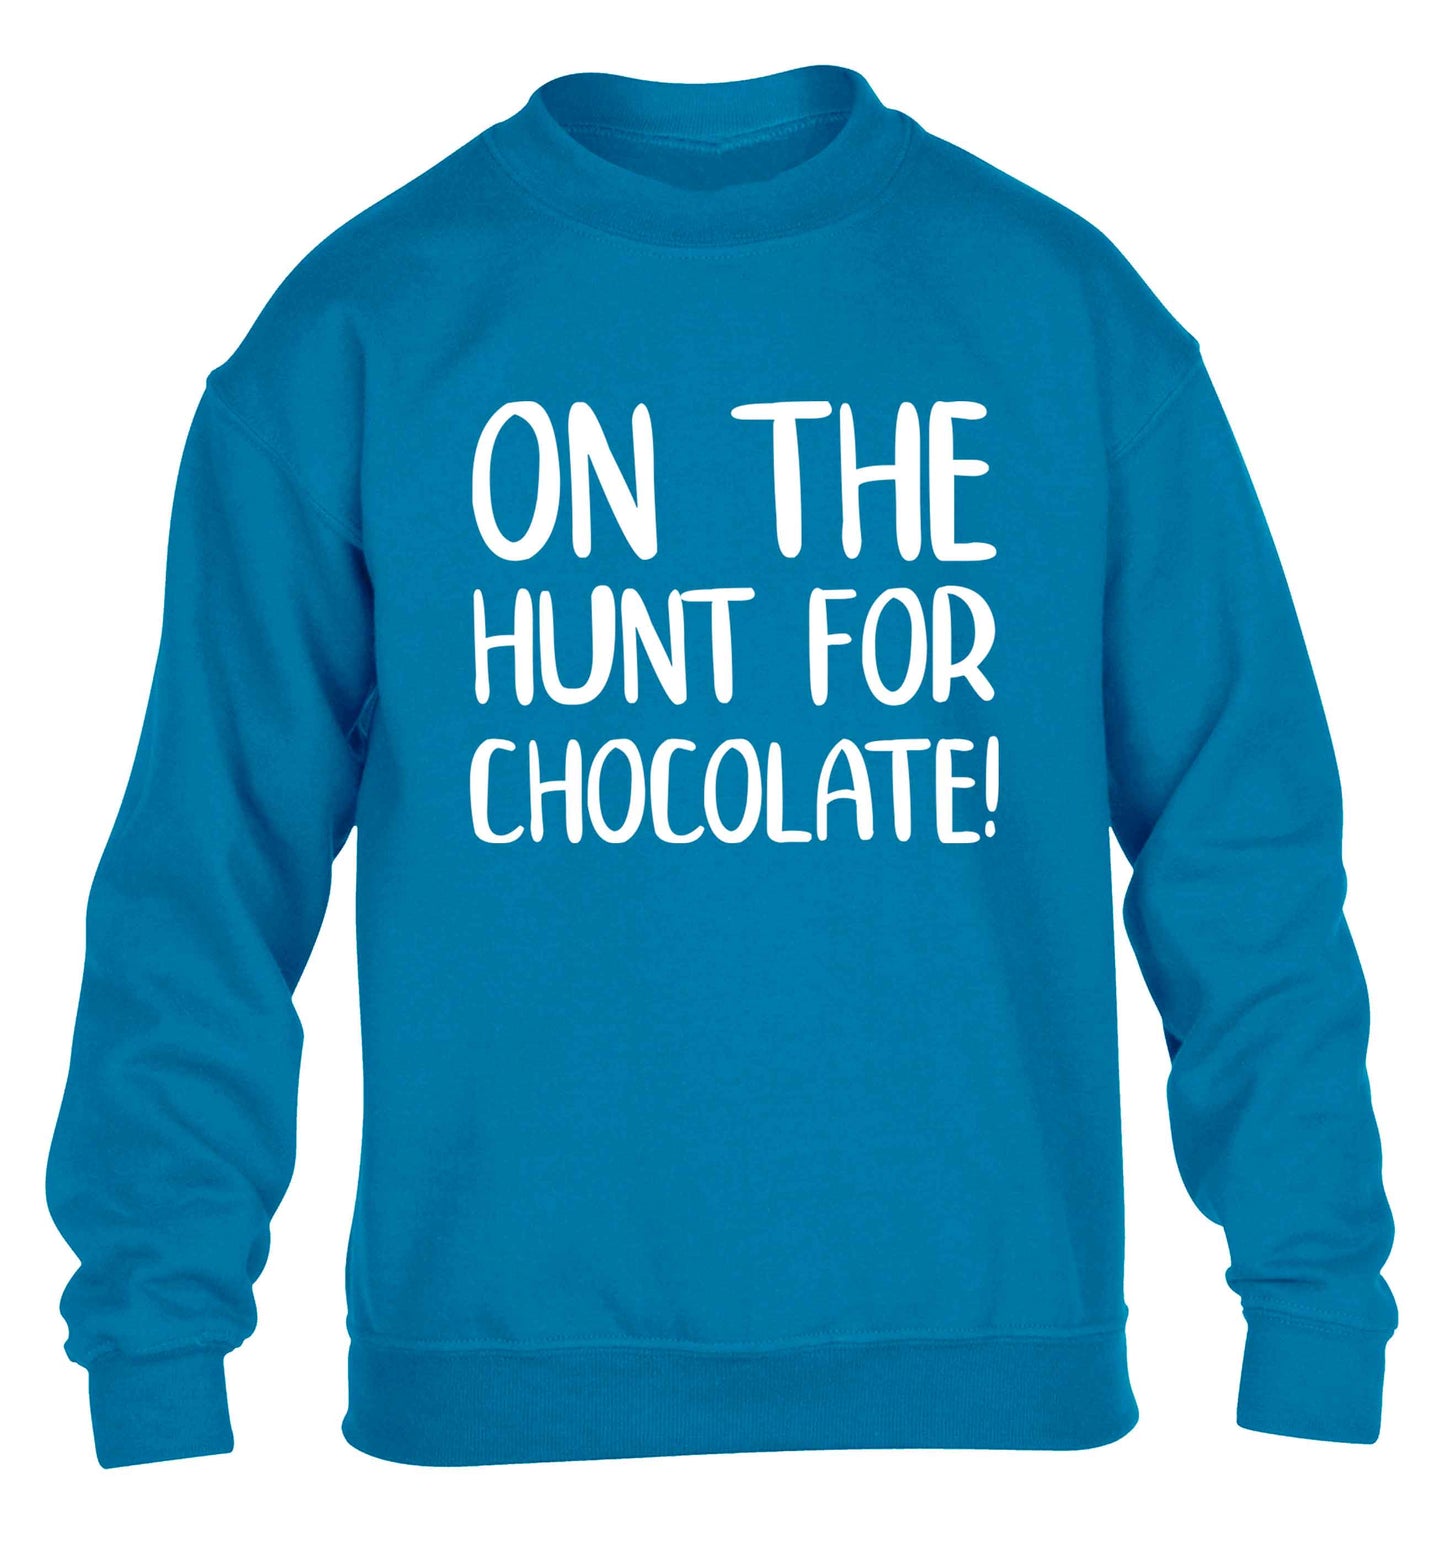 On the hunt for chocolate! children's blue sweater 12-13 Years